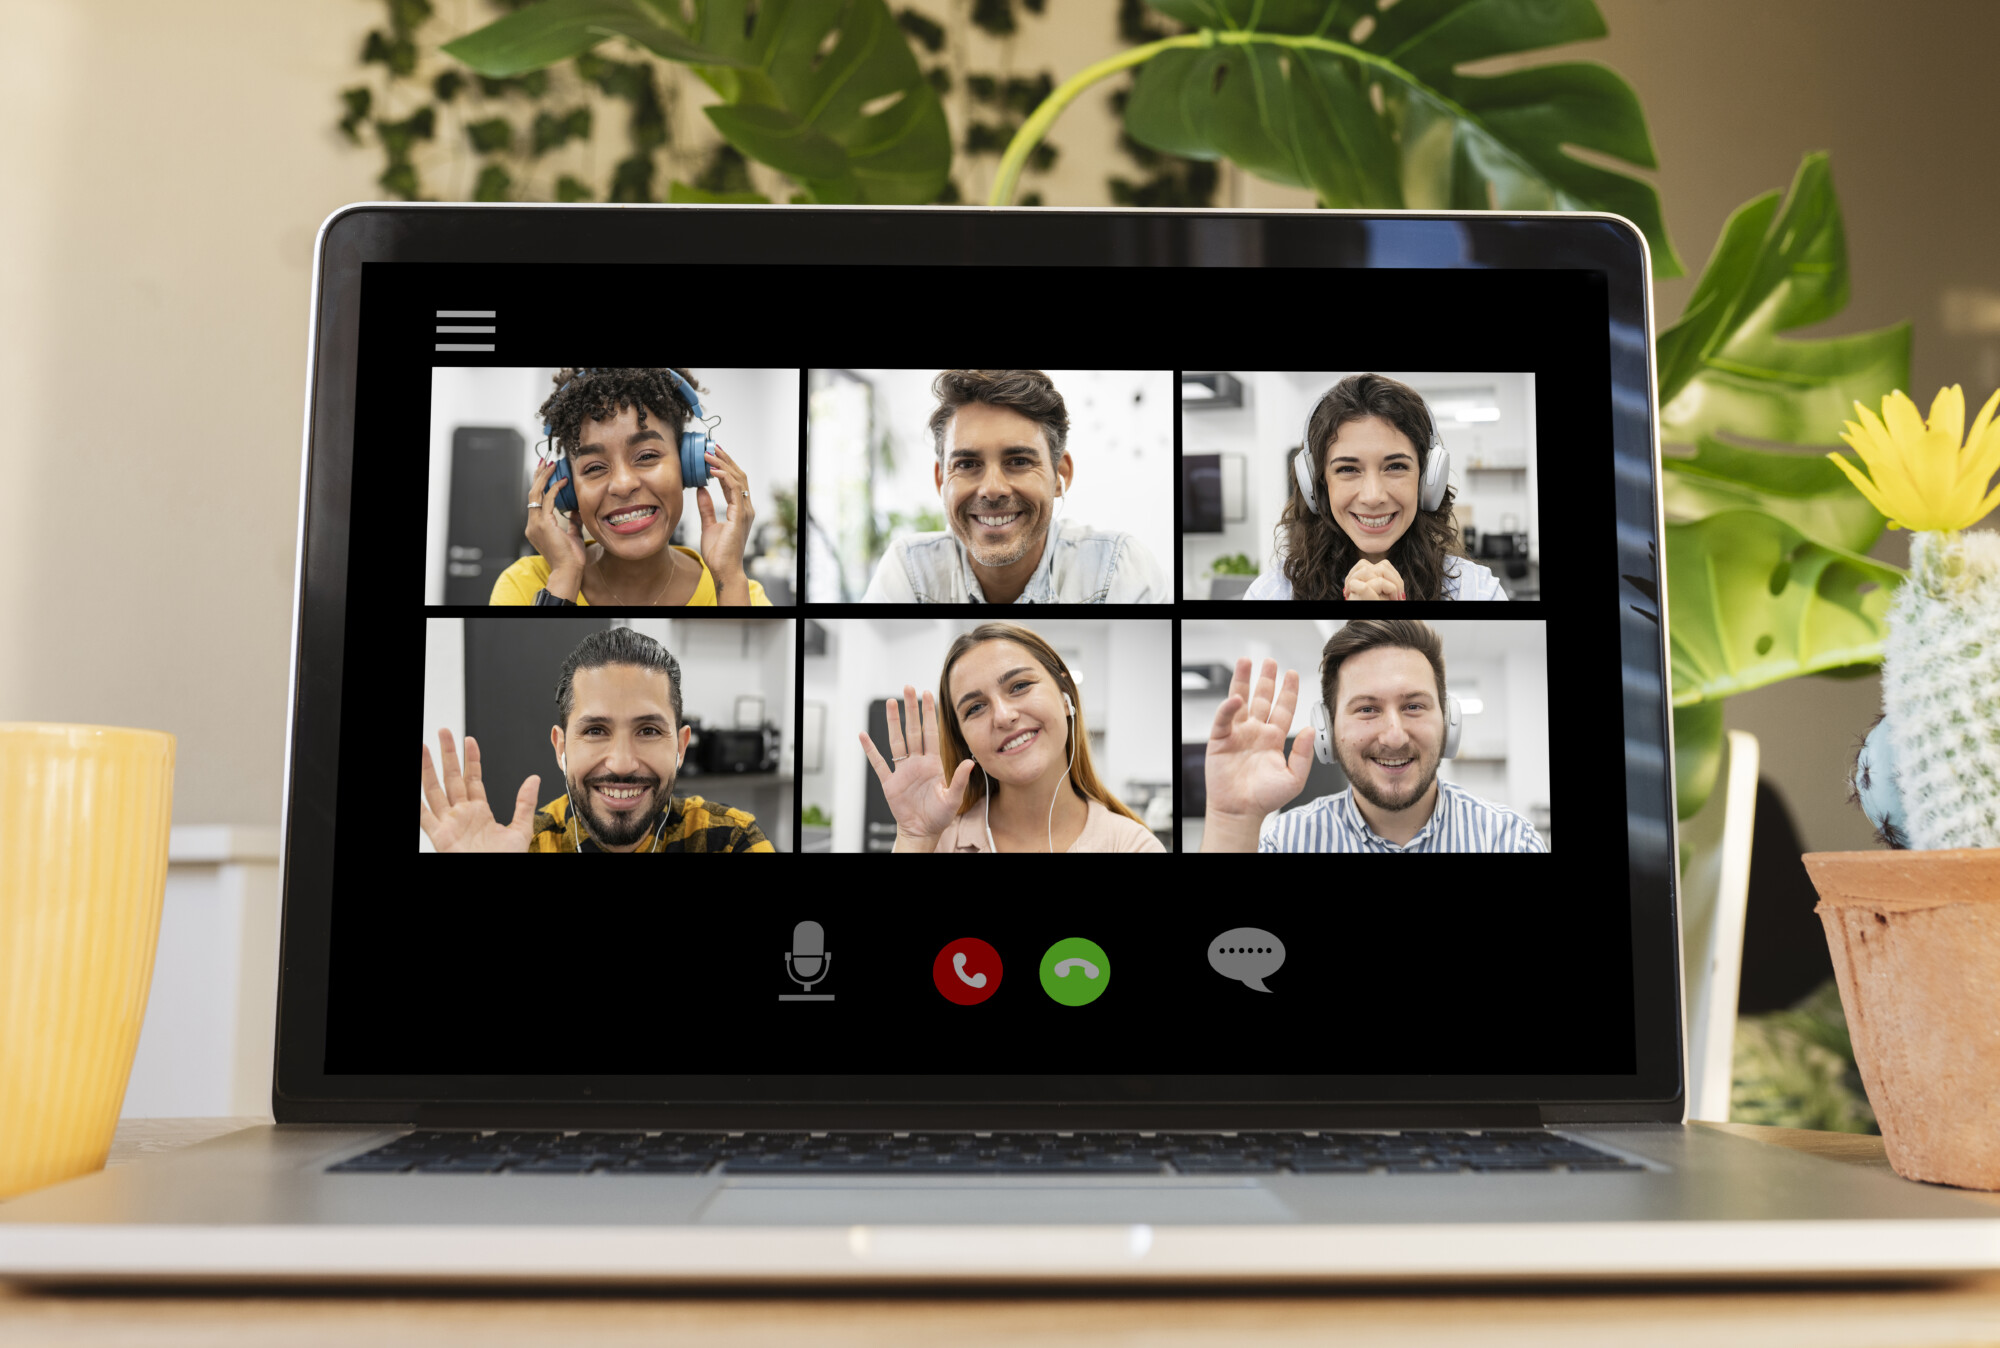 working from home tip 5 - setup virtual or in person meetings with friends or work colleagues to prevent feeling burnout or lonely.